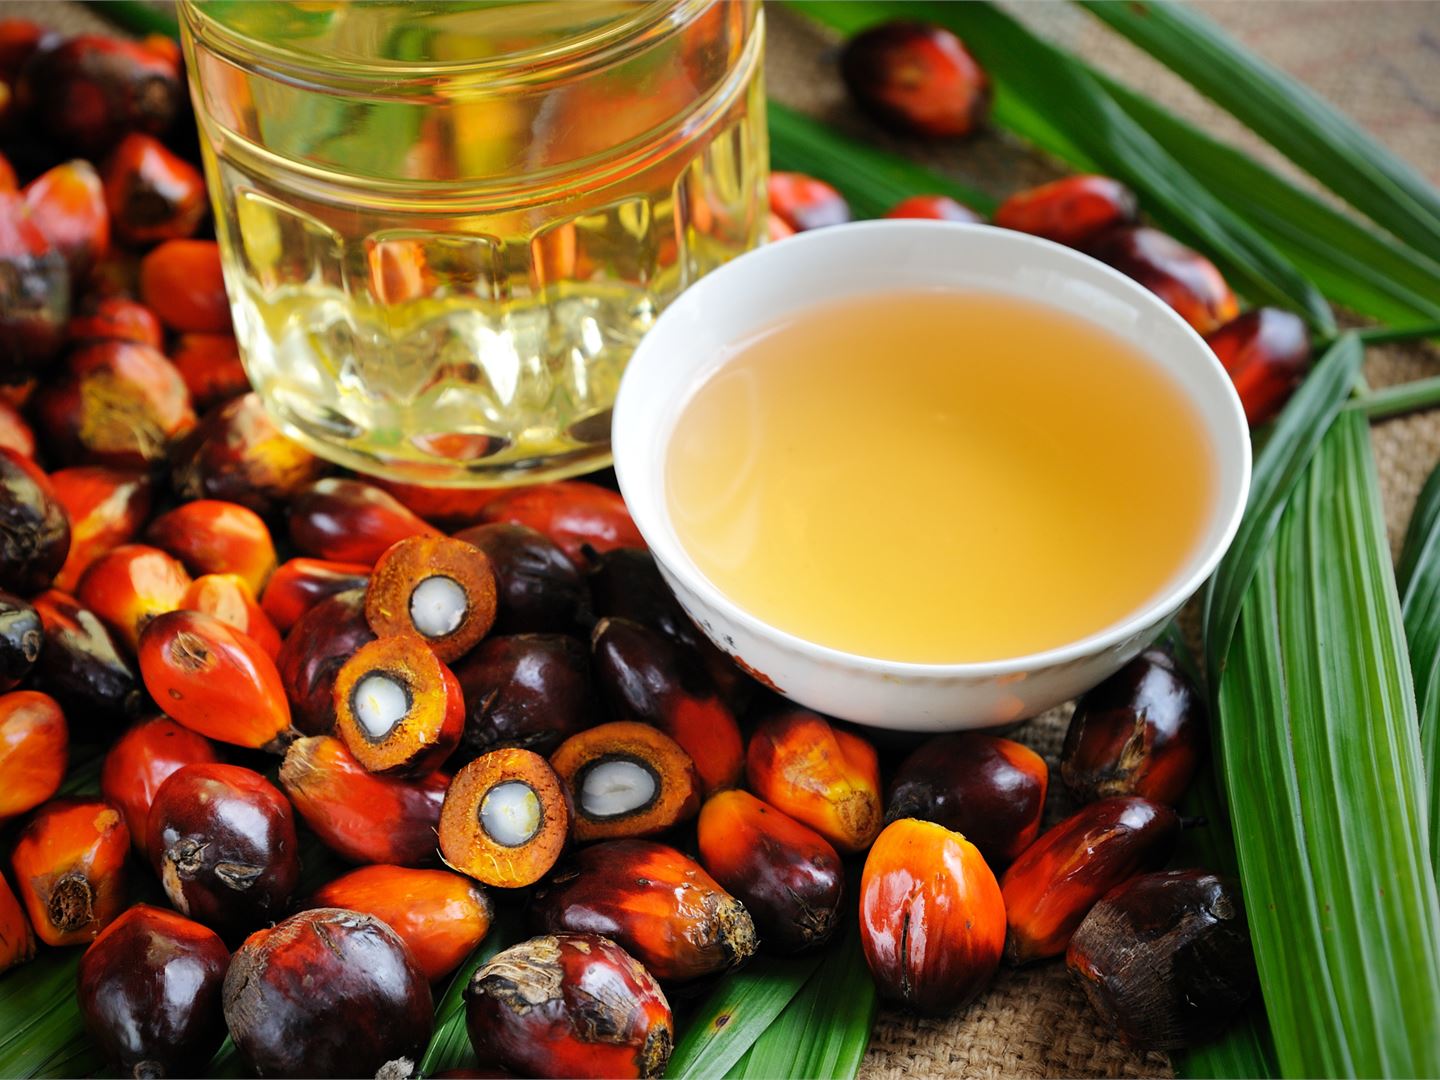 Raw material policy: Palm oil